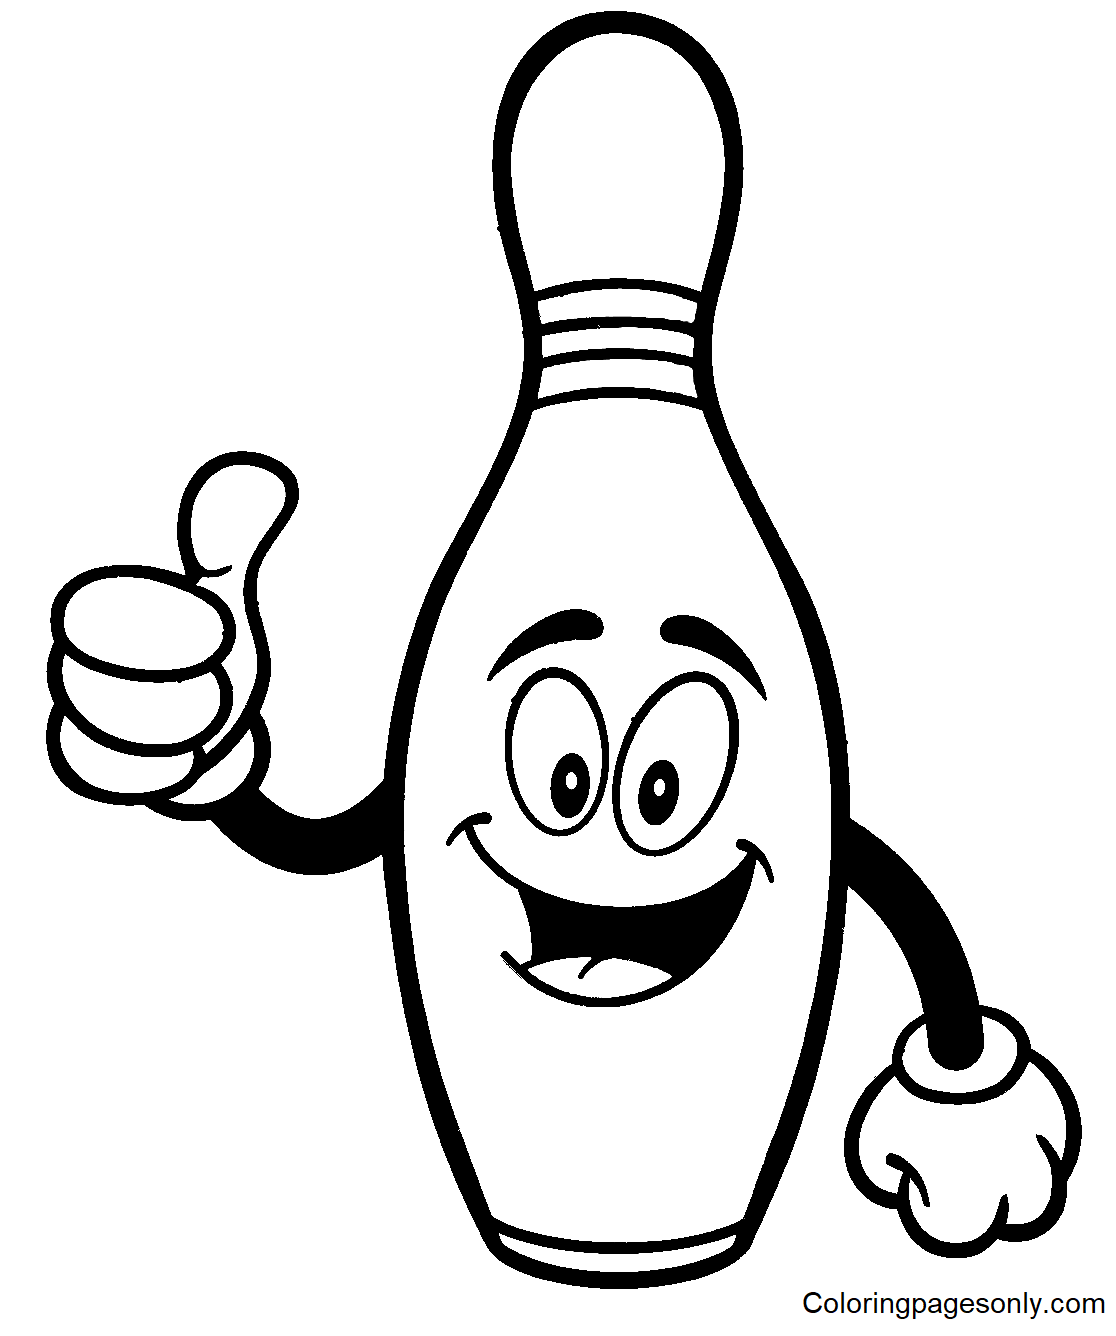 Bowling Pin with Thumbs Up Coloring Page